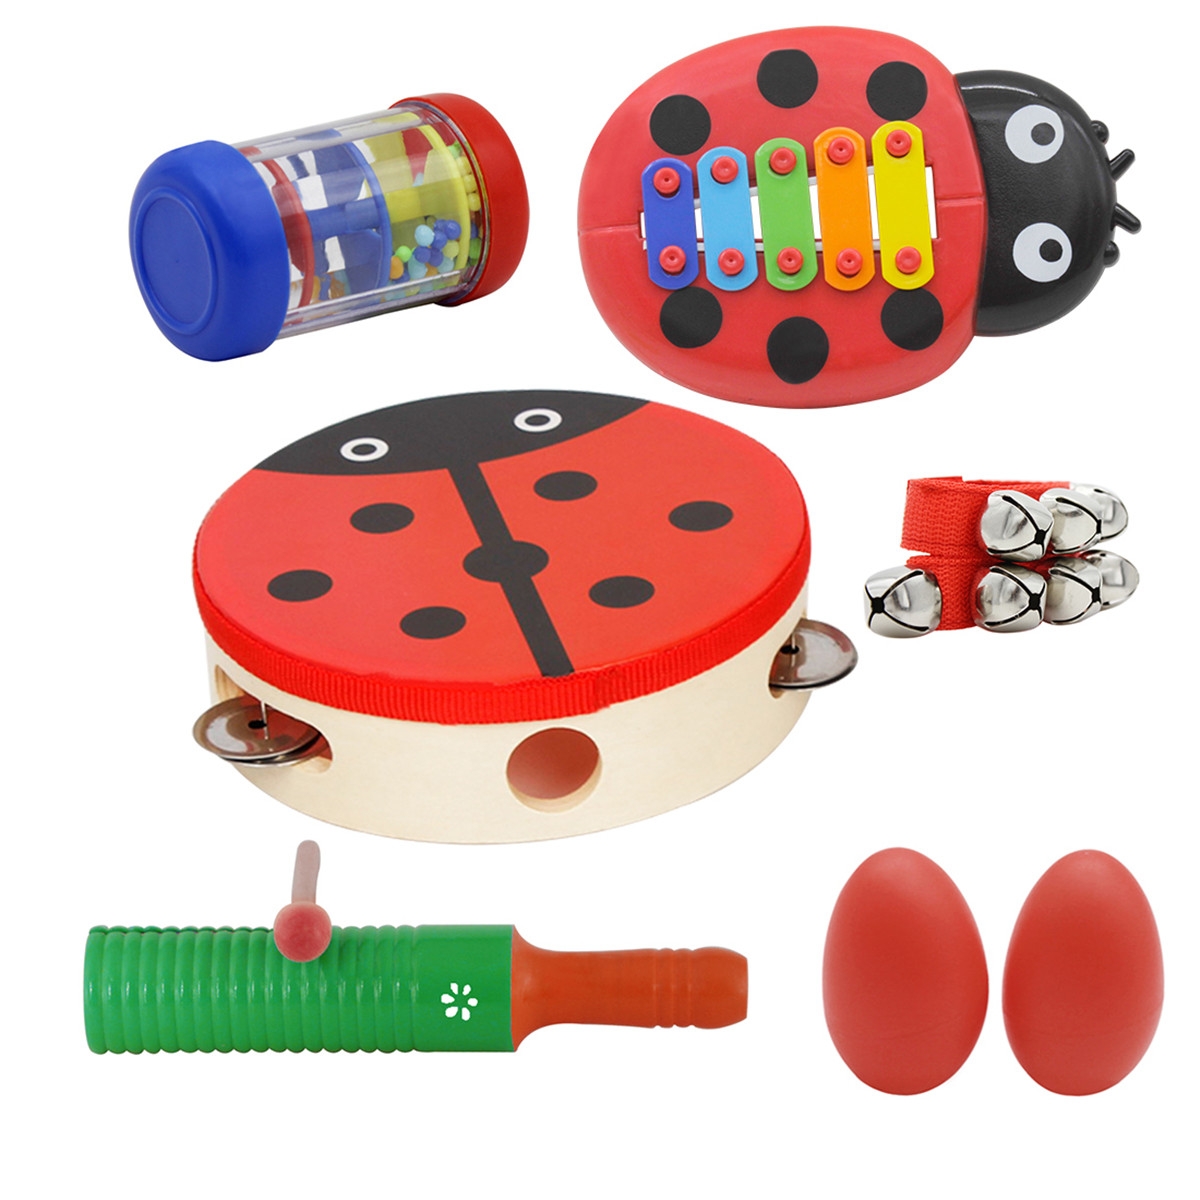 Orff Musical Instruments Sets Hand Drum Egg Maracas Wrist Bell Single Ring Percussion Piano A Section of Rain Educational Musical Gifts